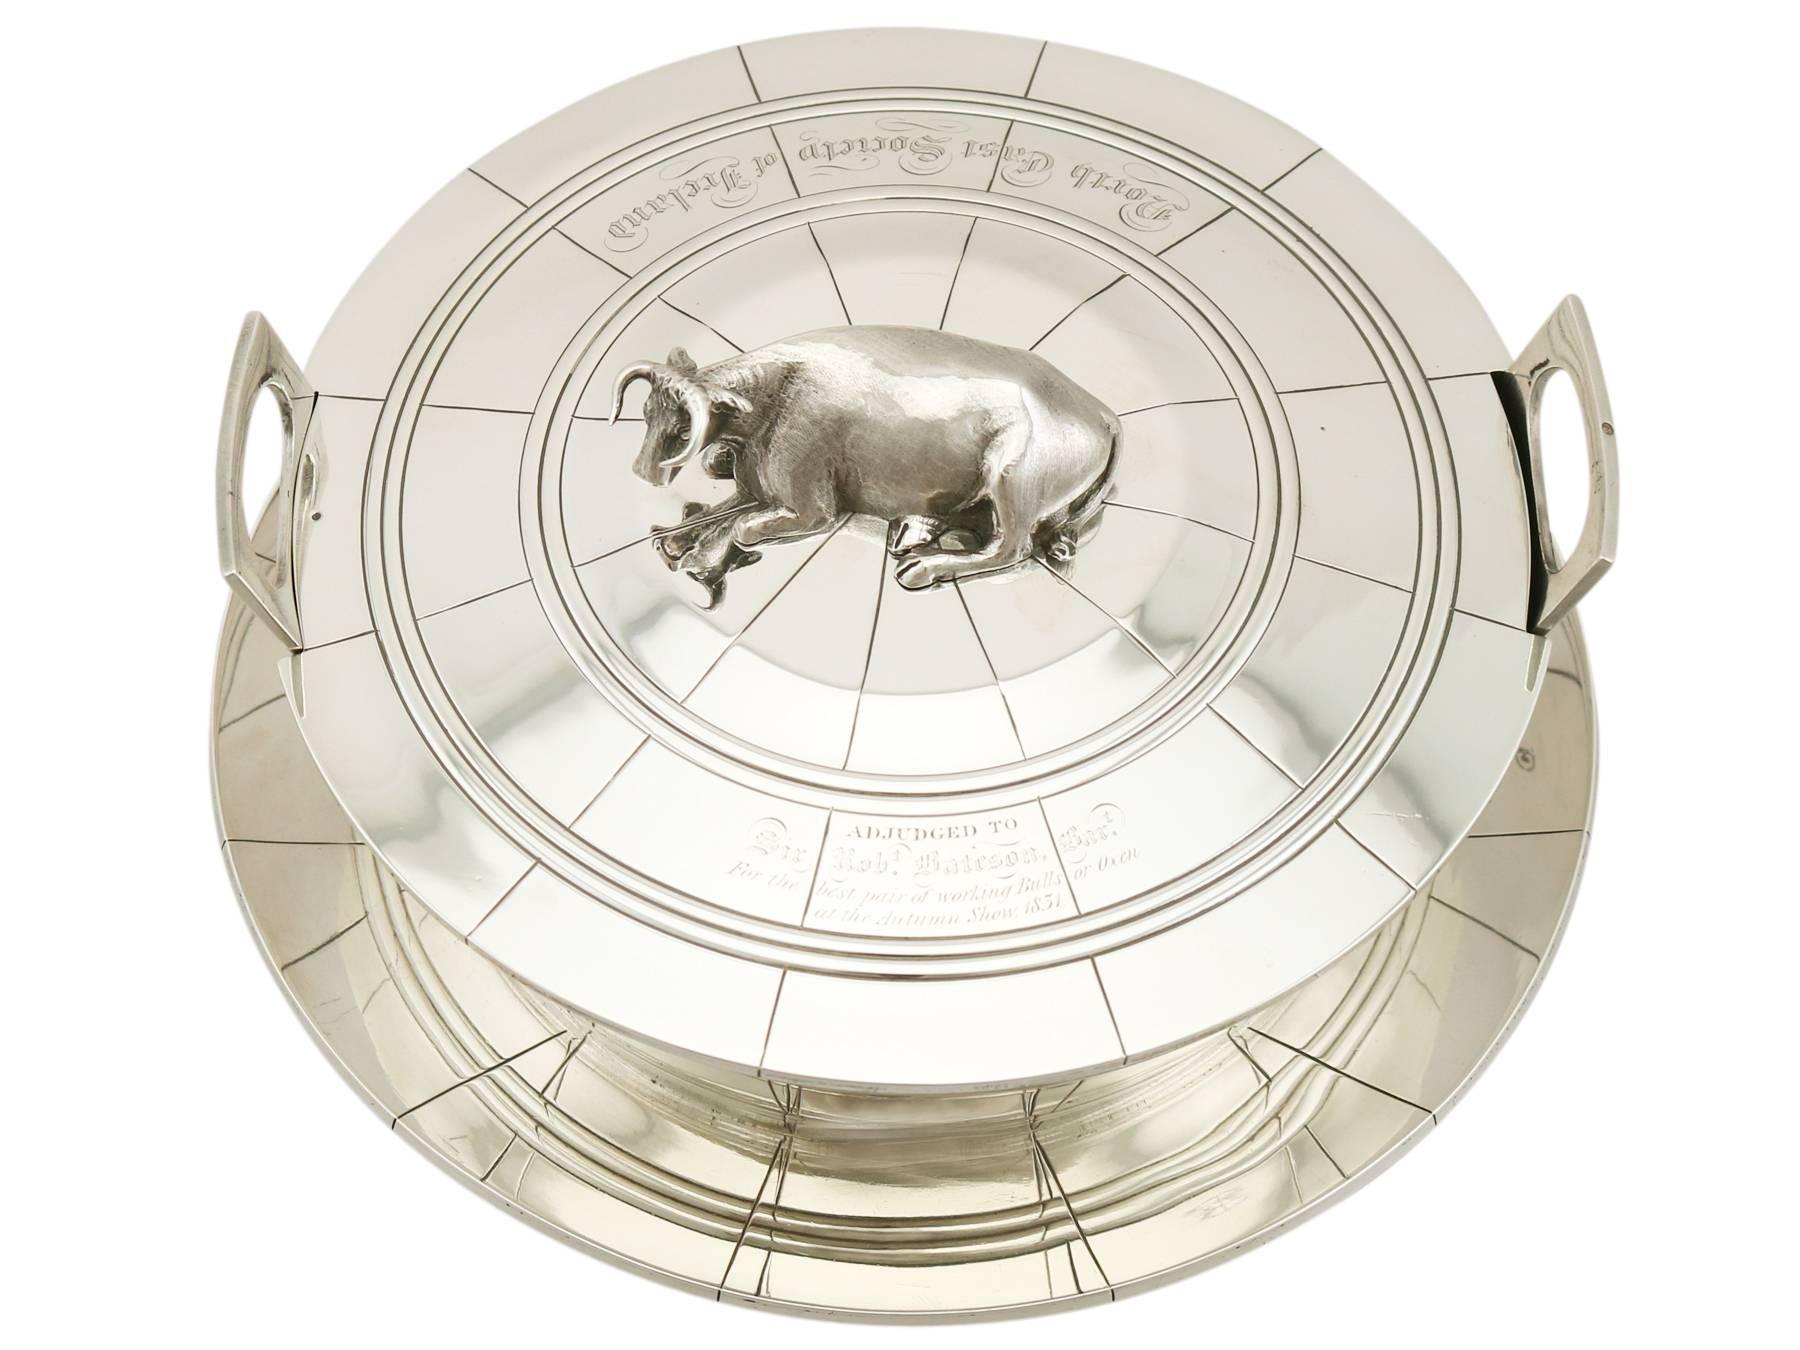 A exceptional, fine and impressive antique William IV English sterling silver butter dish and cover; an addition to our silver dining collection at AC Silver.

This exceptional antique William IV sterling silver butter dish has a circular tapering